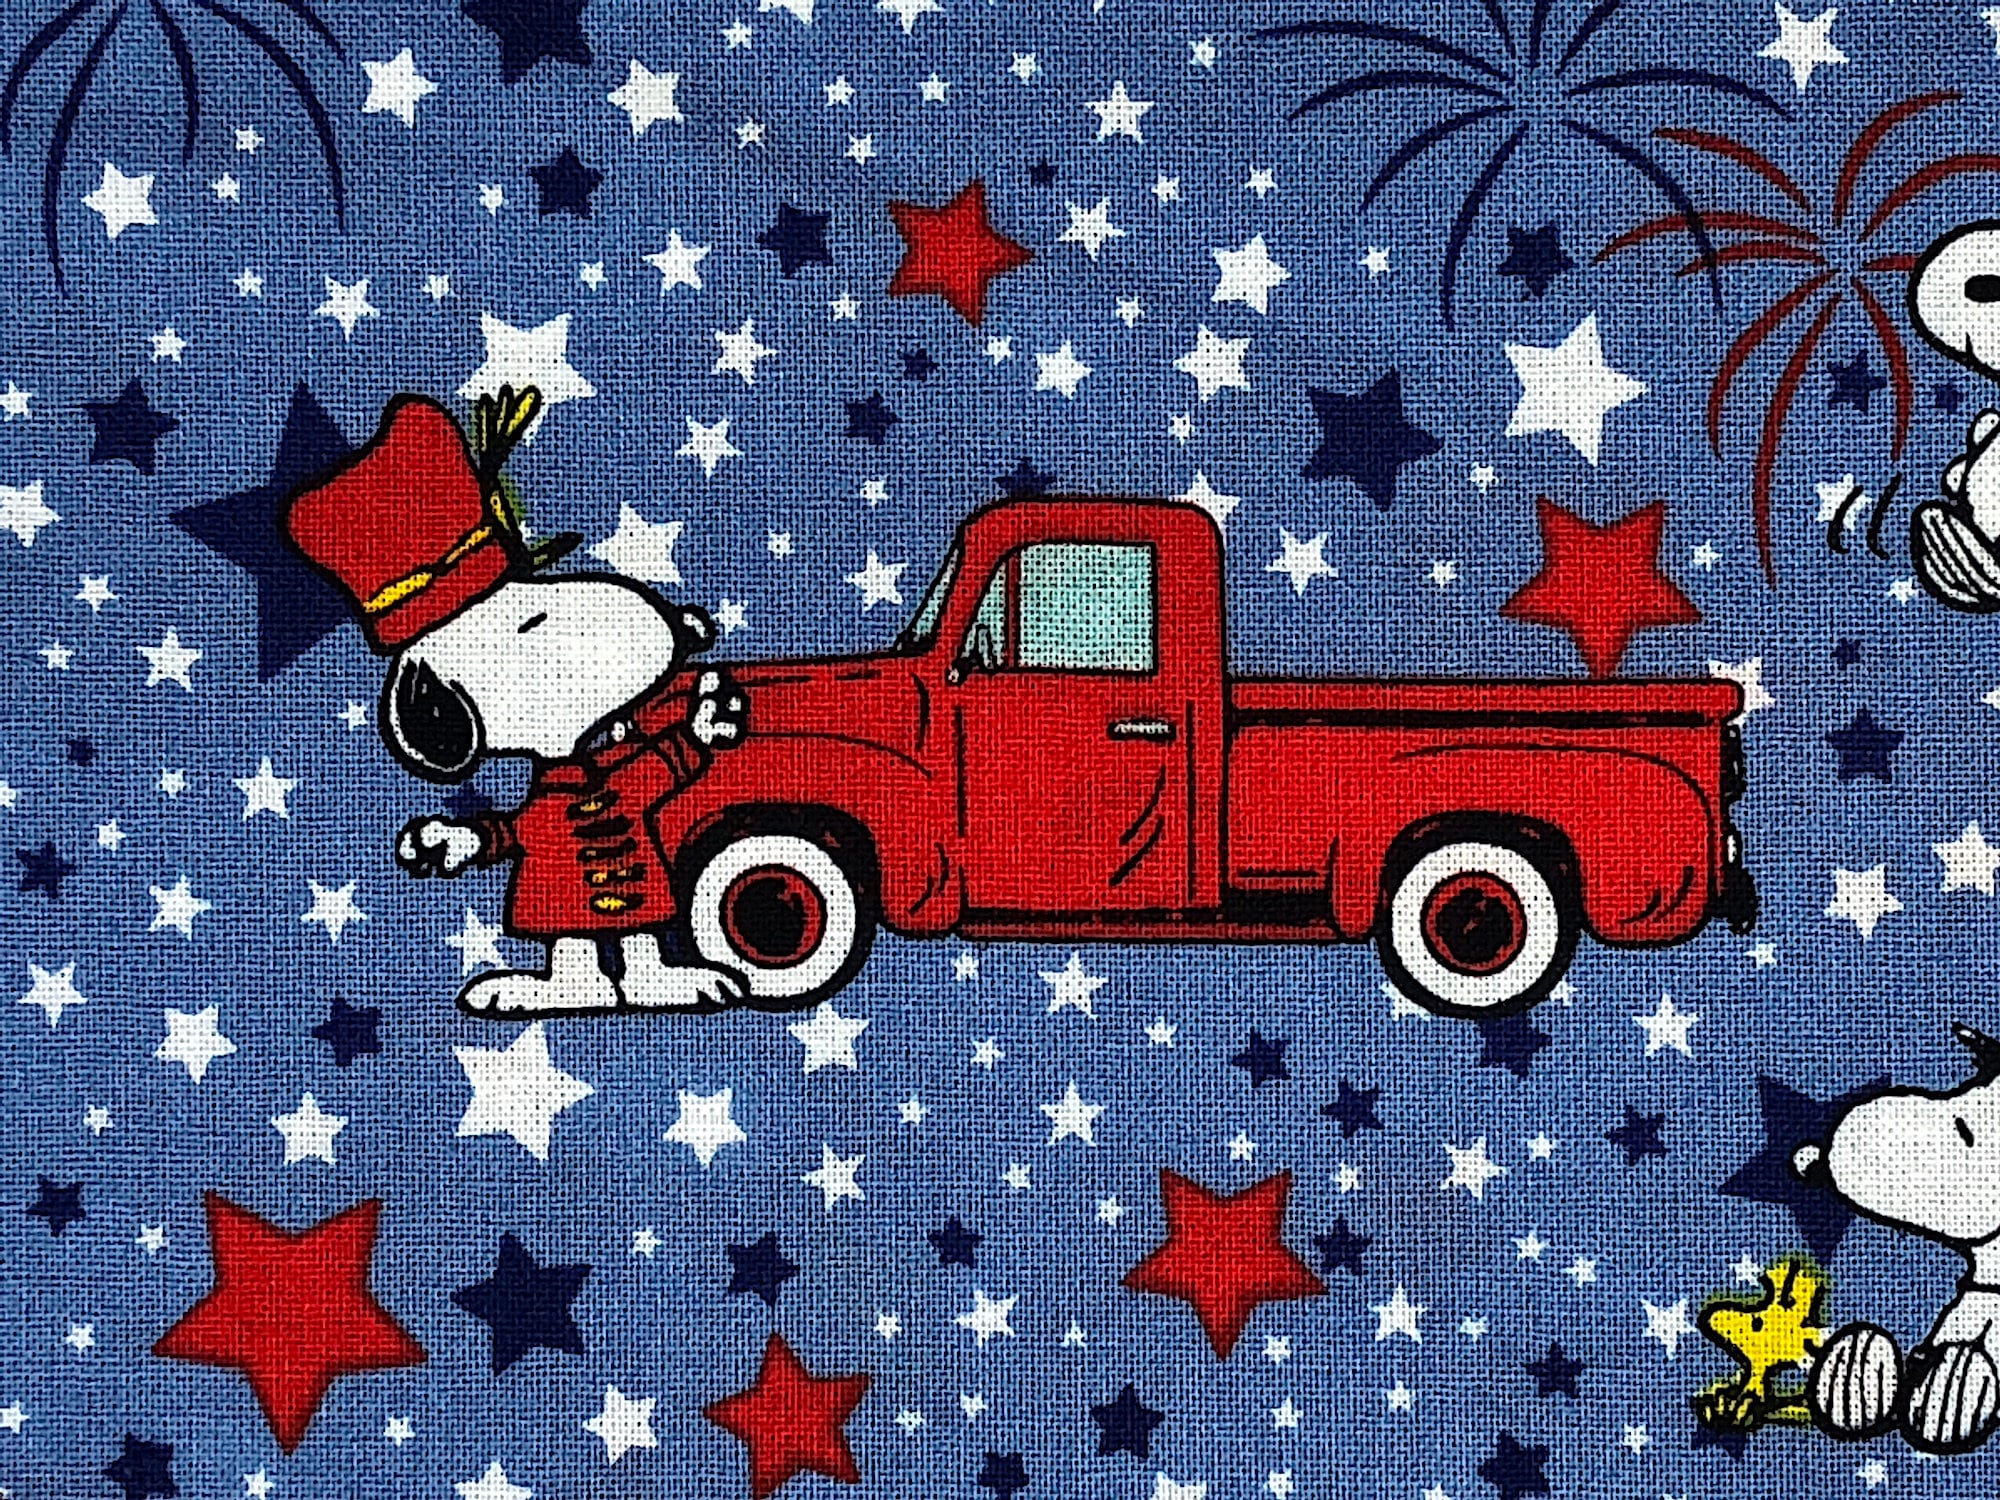 Close up of Snoopy wearing a red outfit standing next to a red truck.